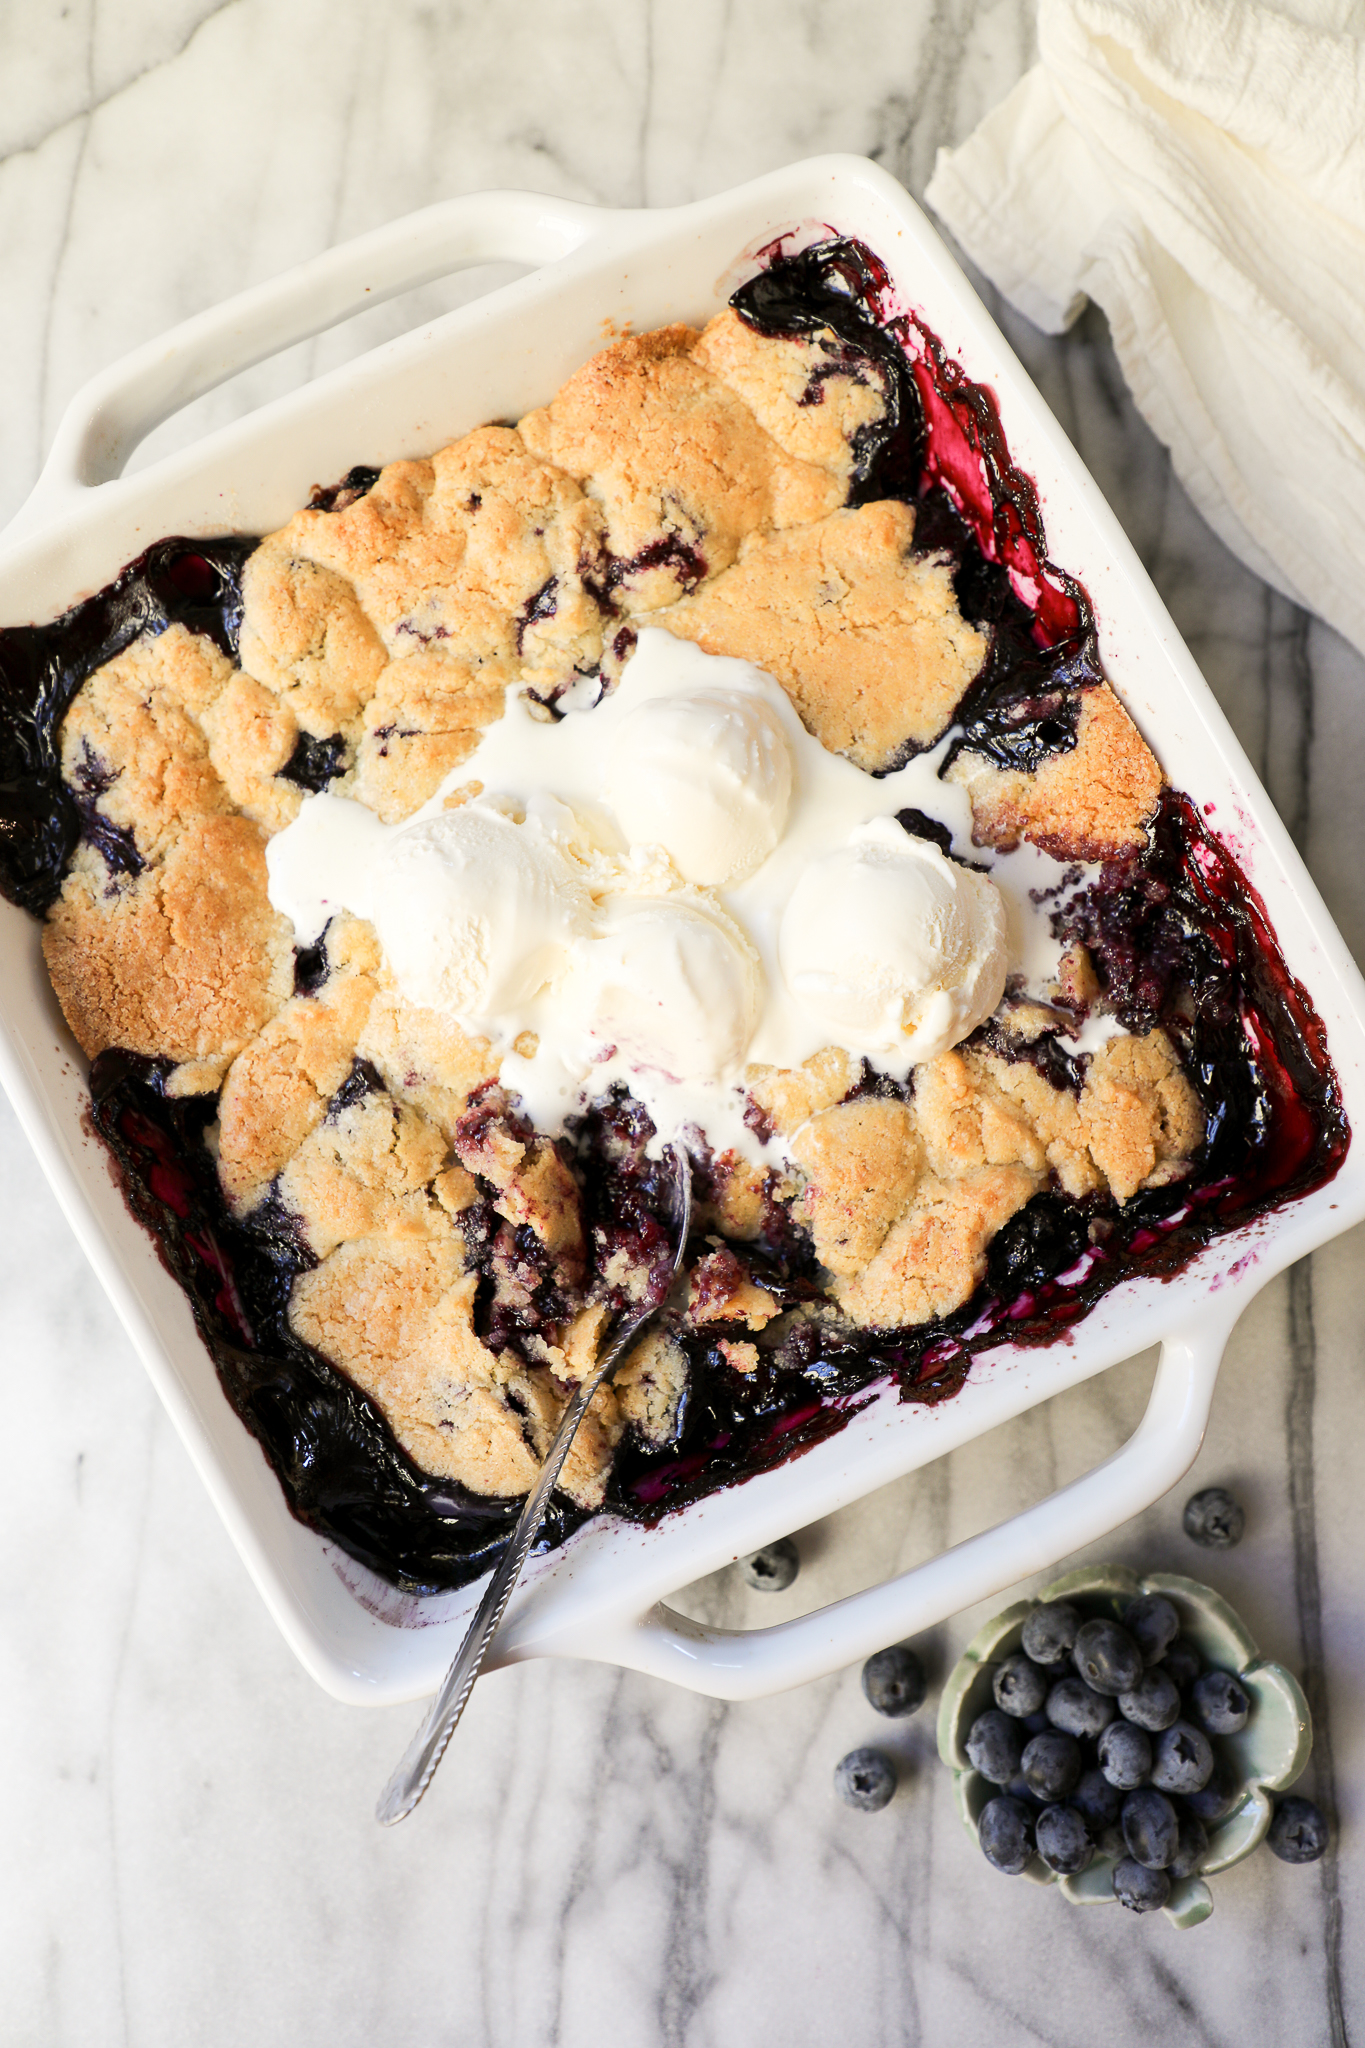 Swedish Blueberry Pie in a square baking dish with melted vanilla ice cream on top.